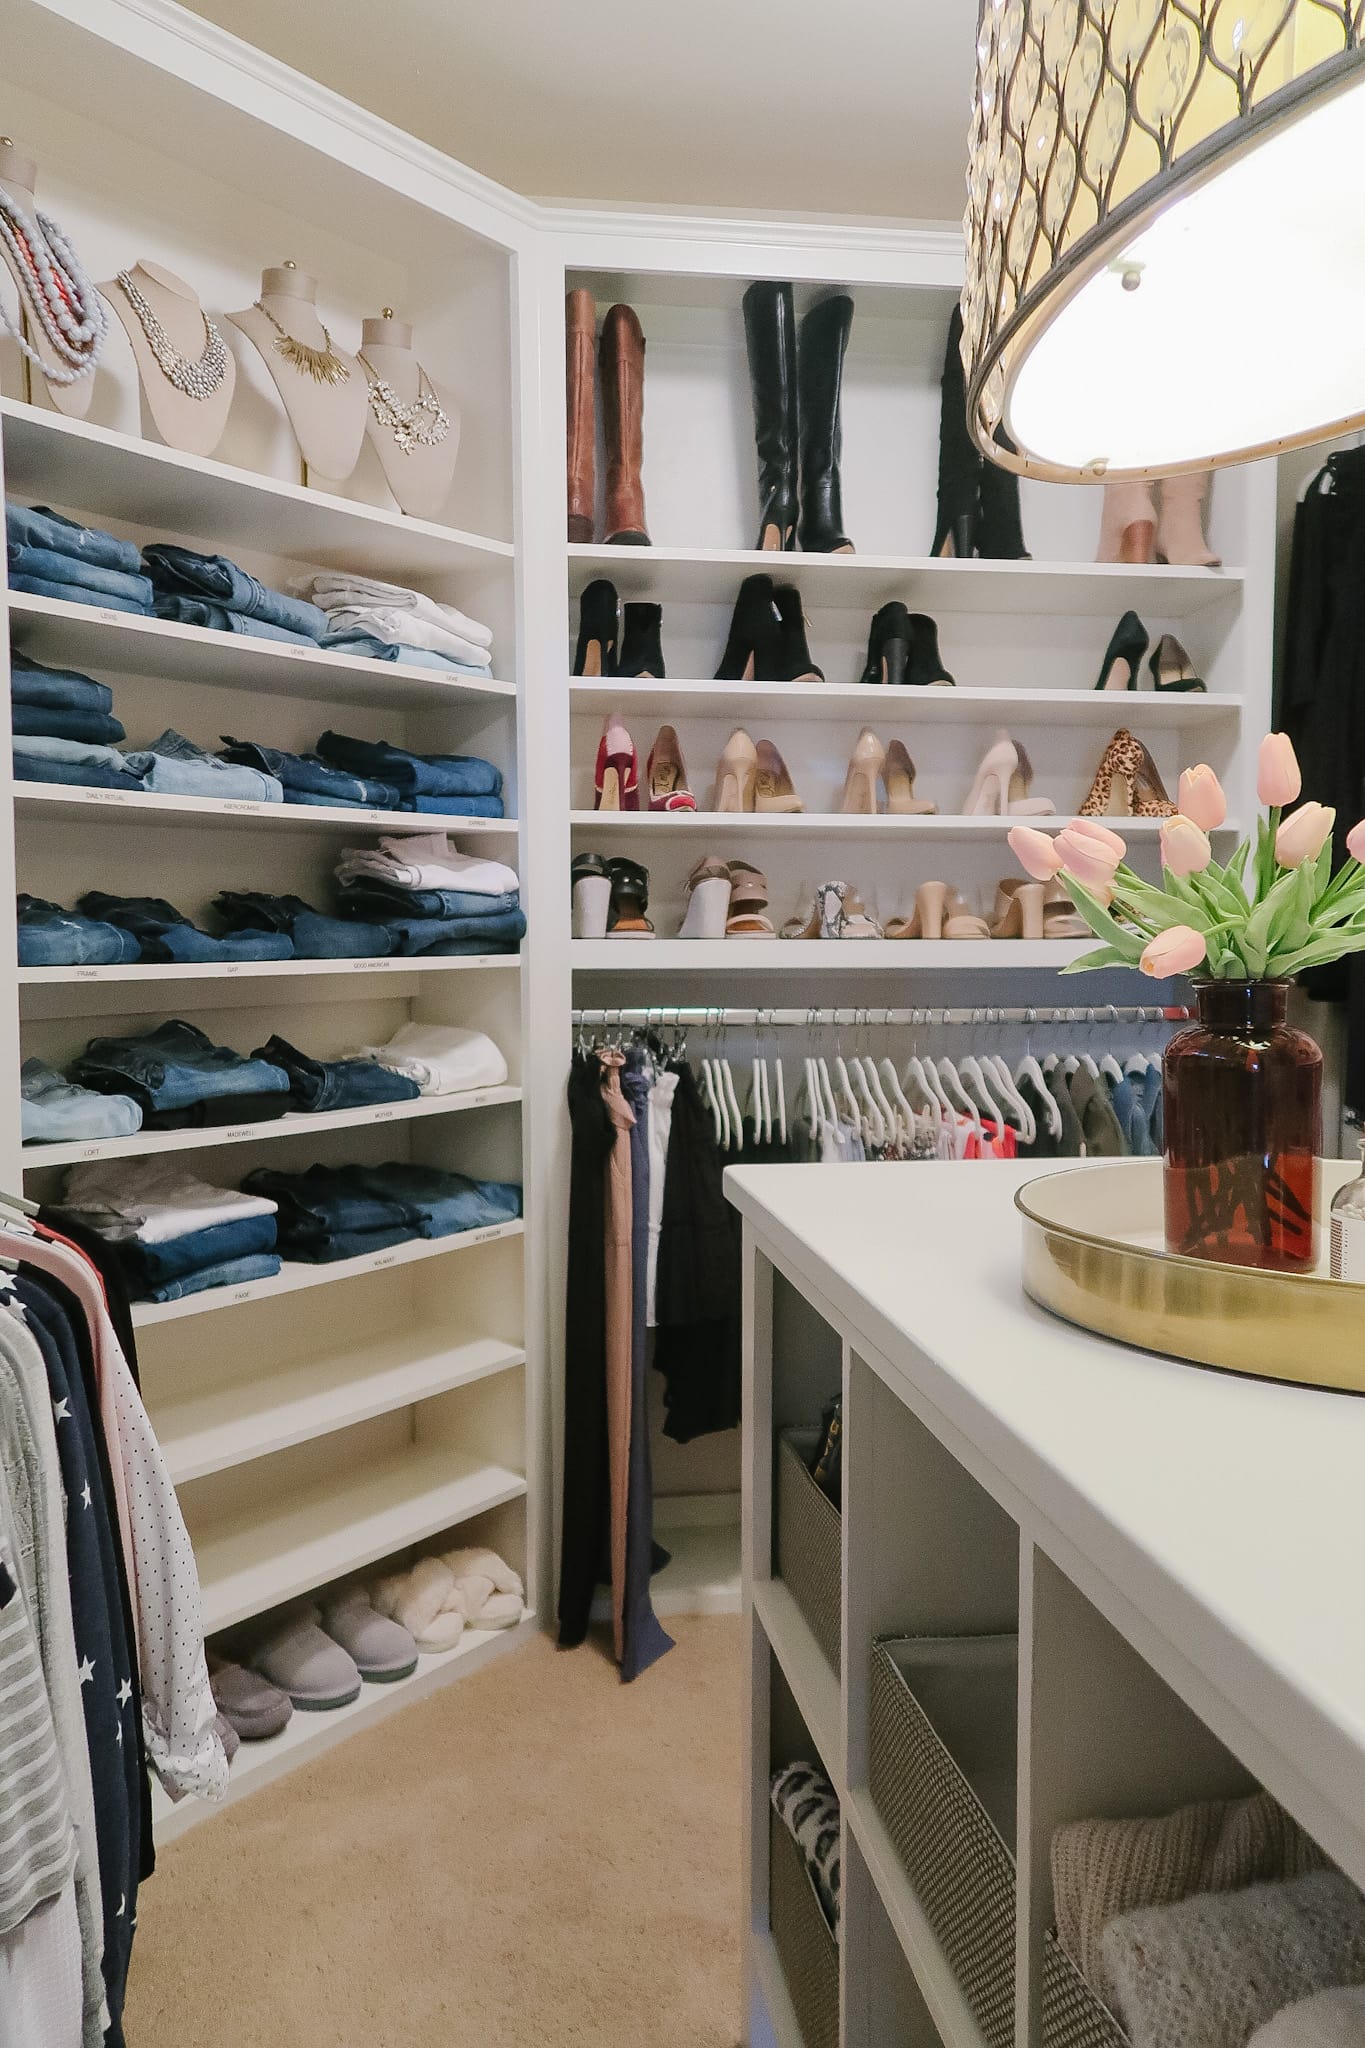 How Do I Organize All of My Shoes in a Custom Closet?